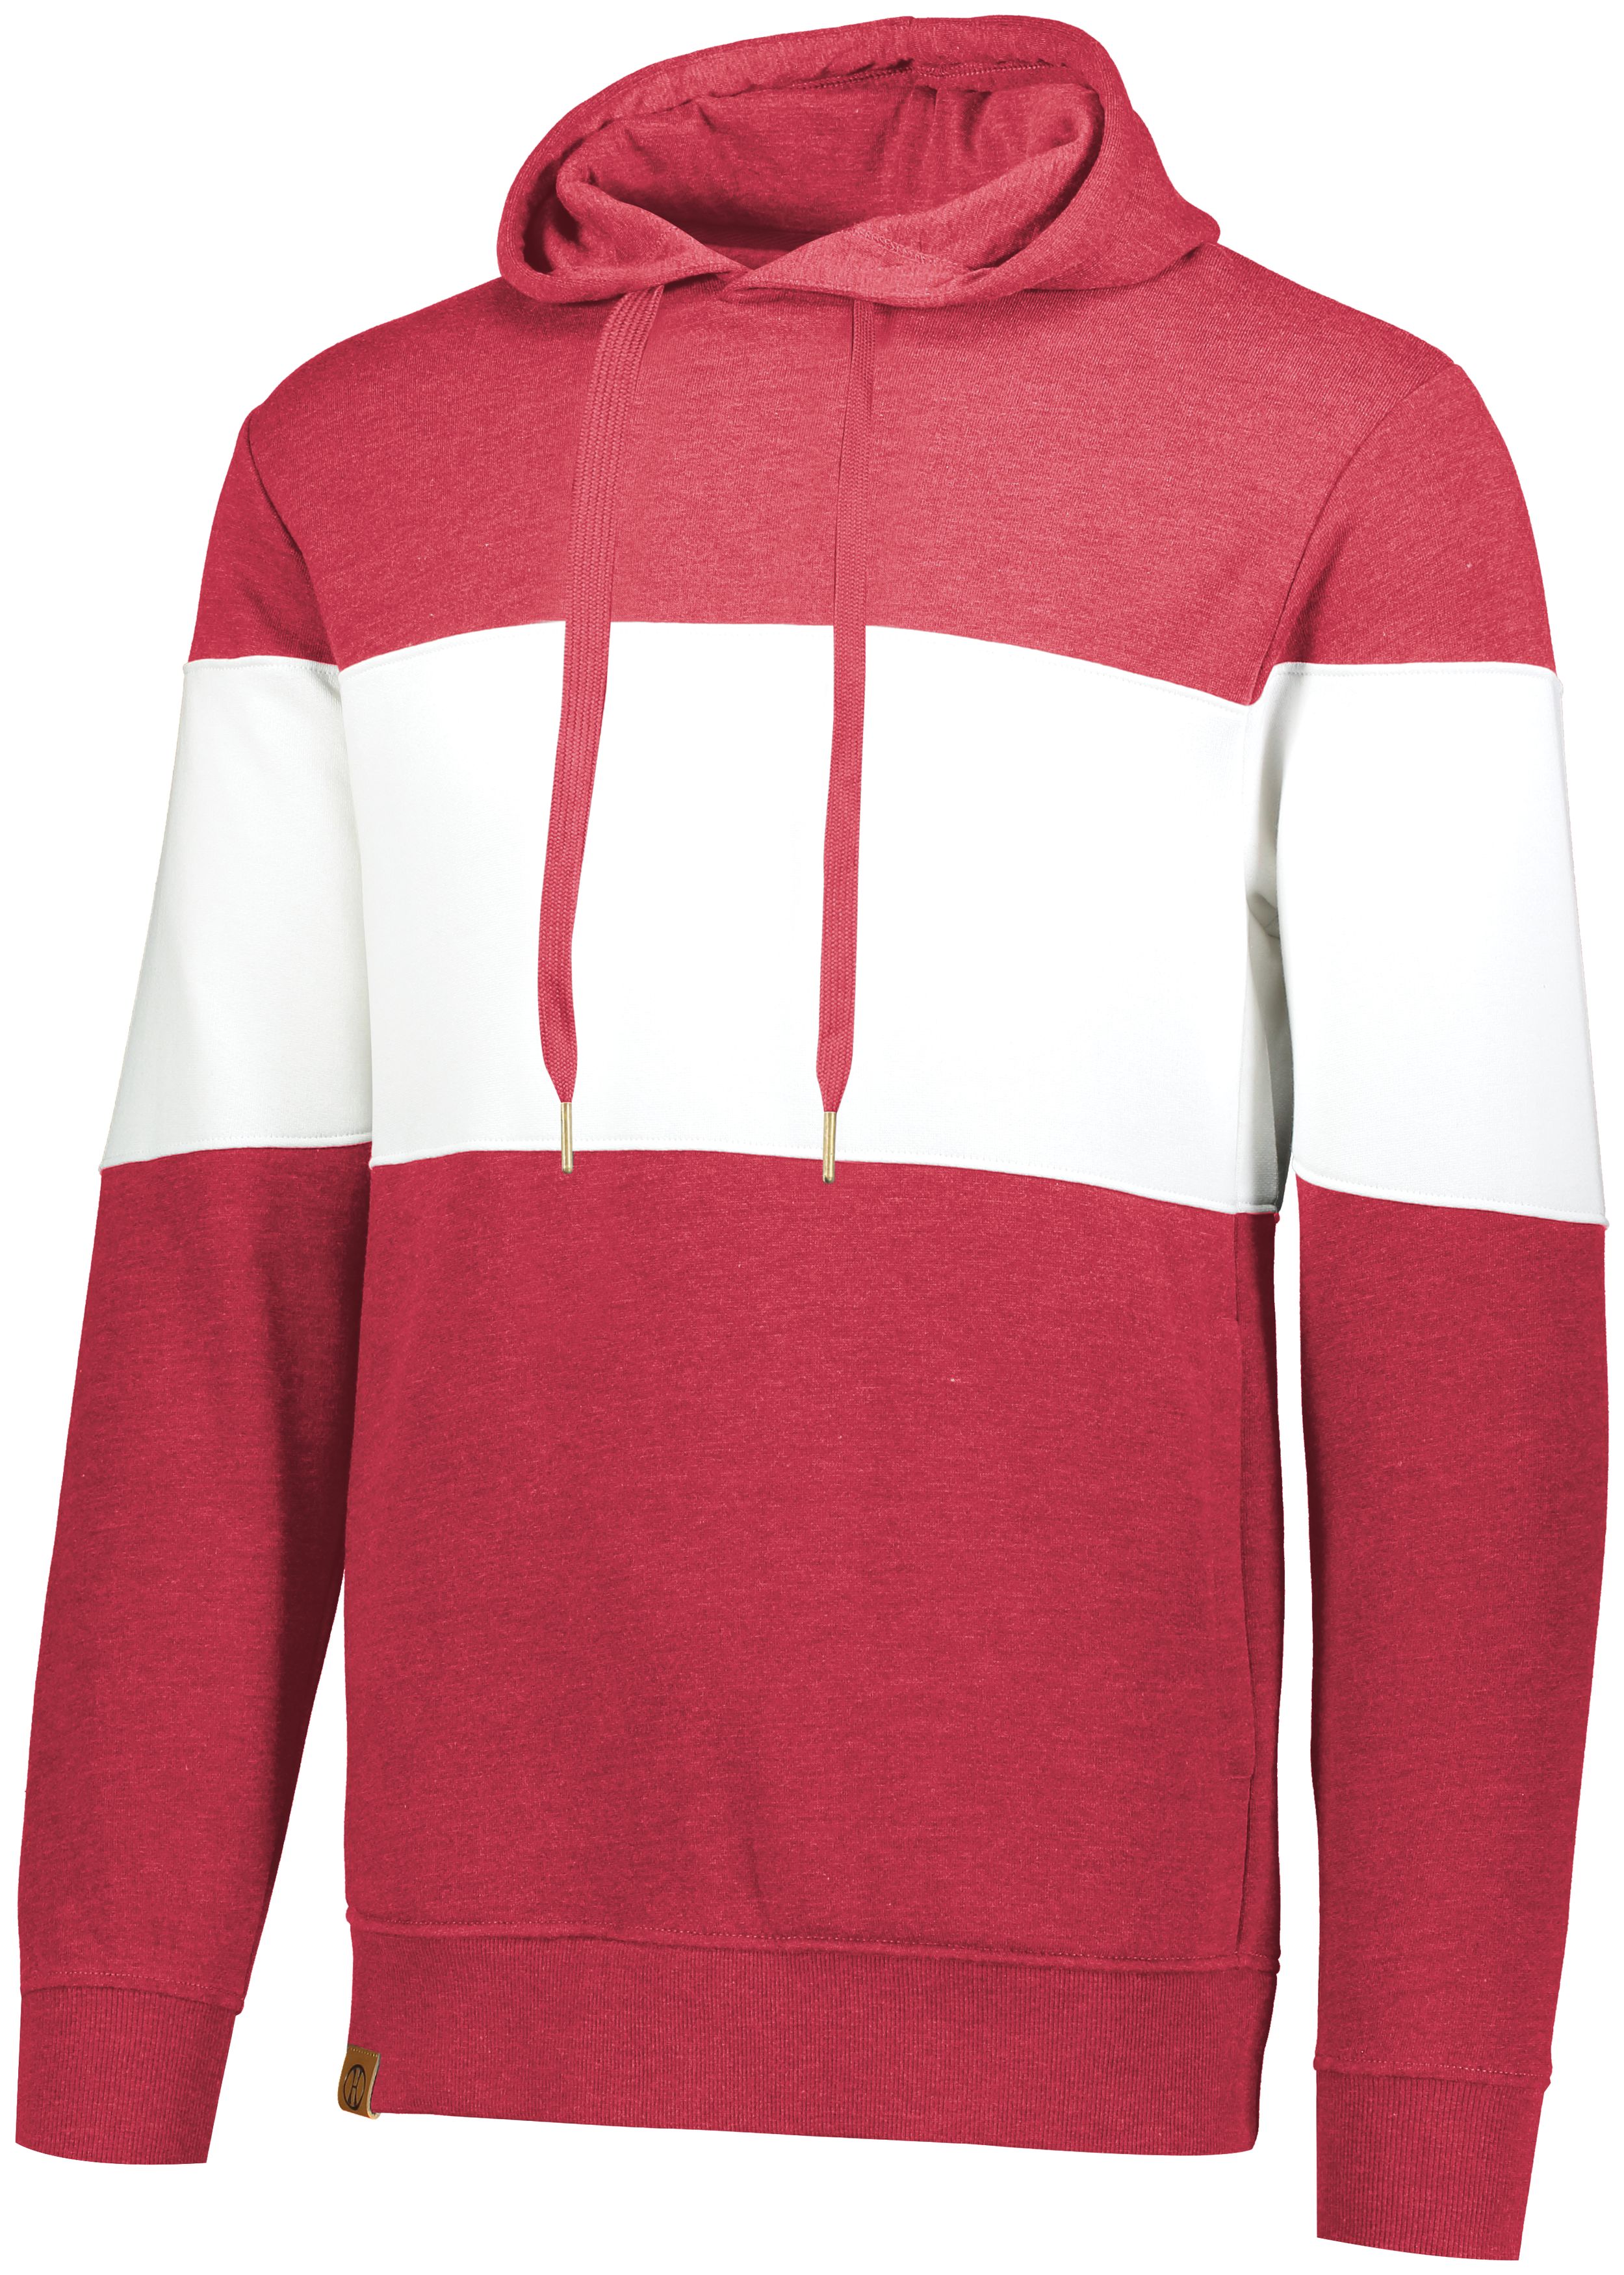 click to view Scarlet Heather/White